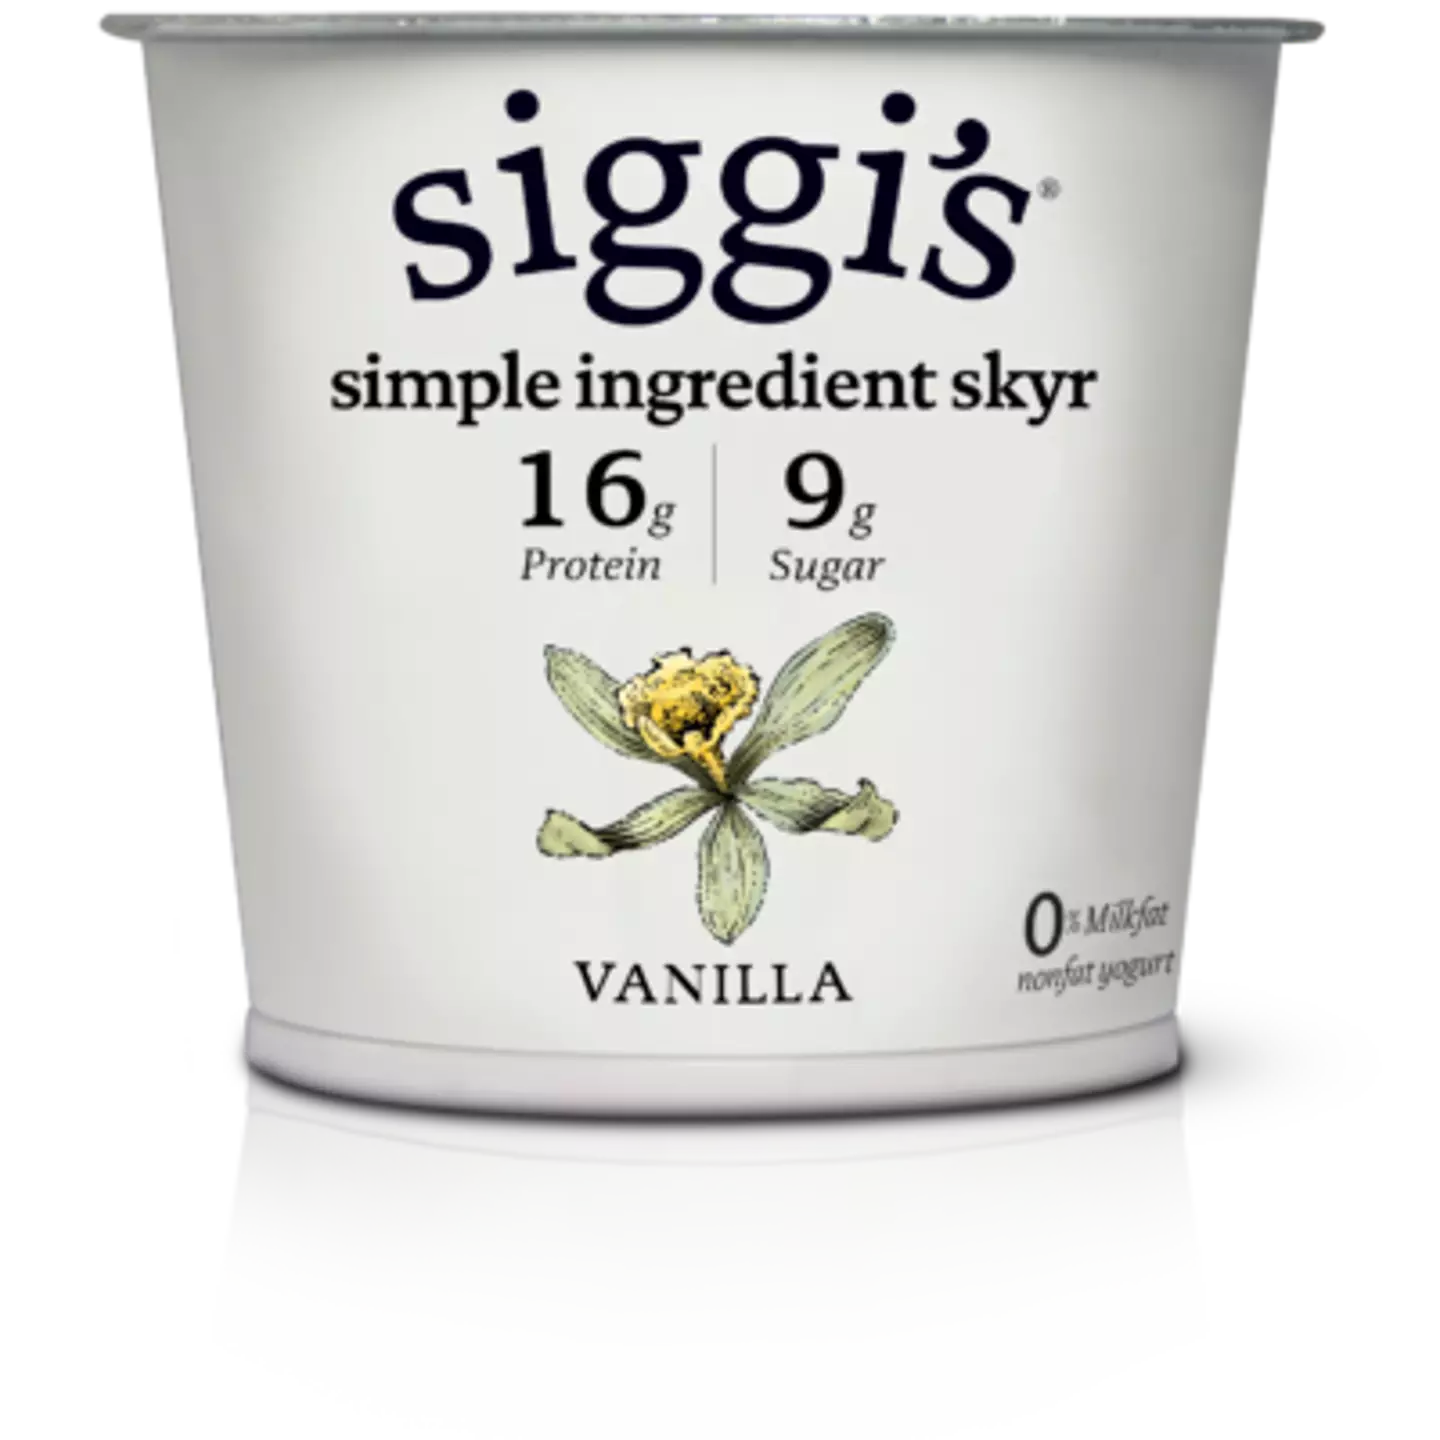 Siggi's are calling on people to take part in their digital detox.